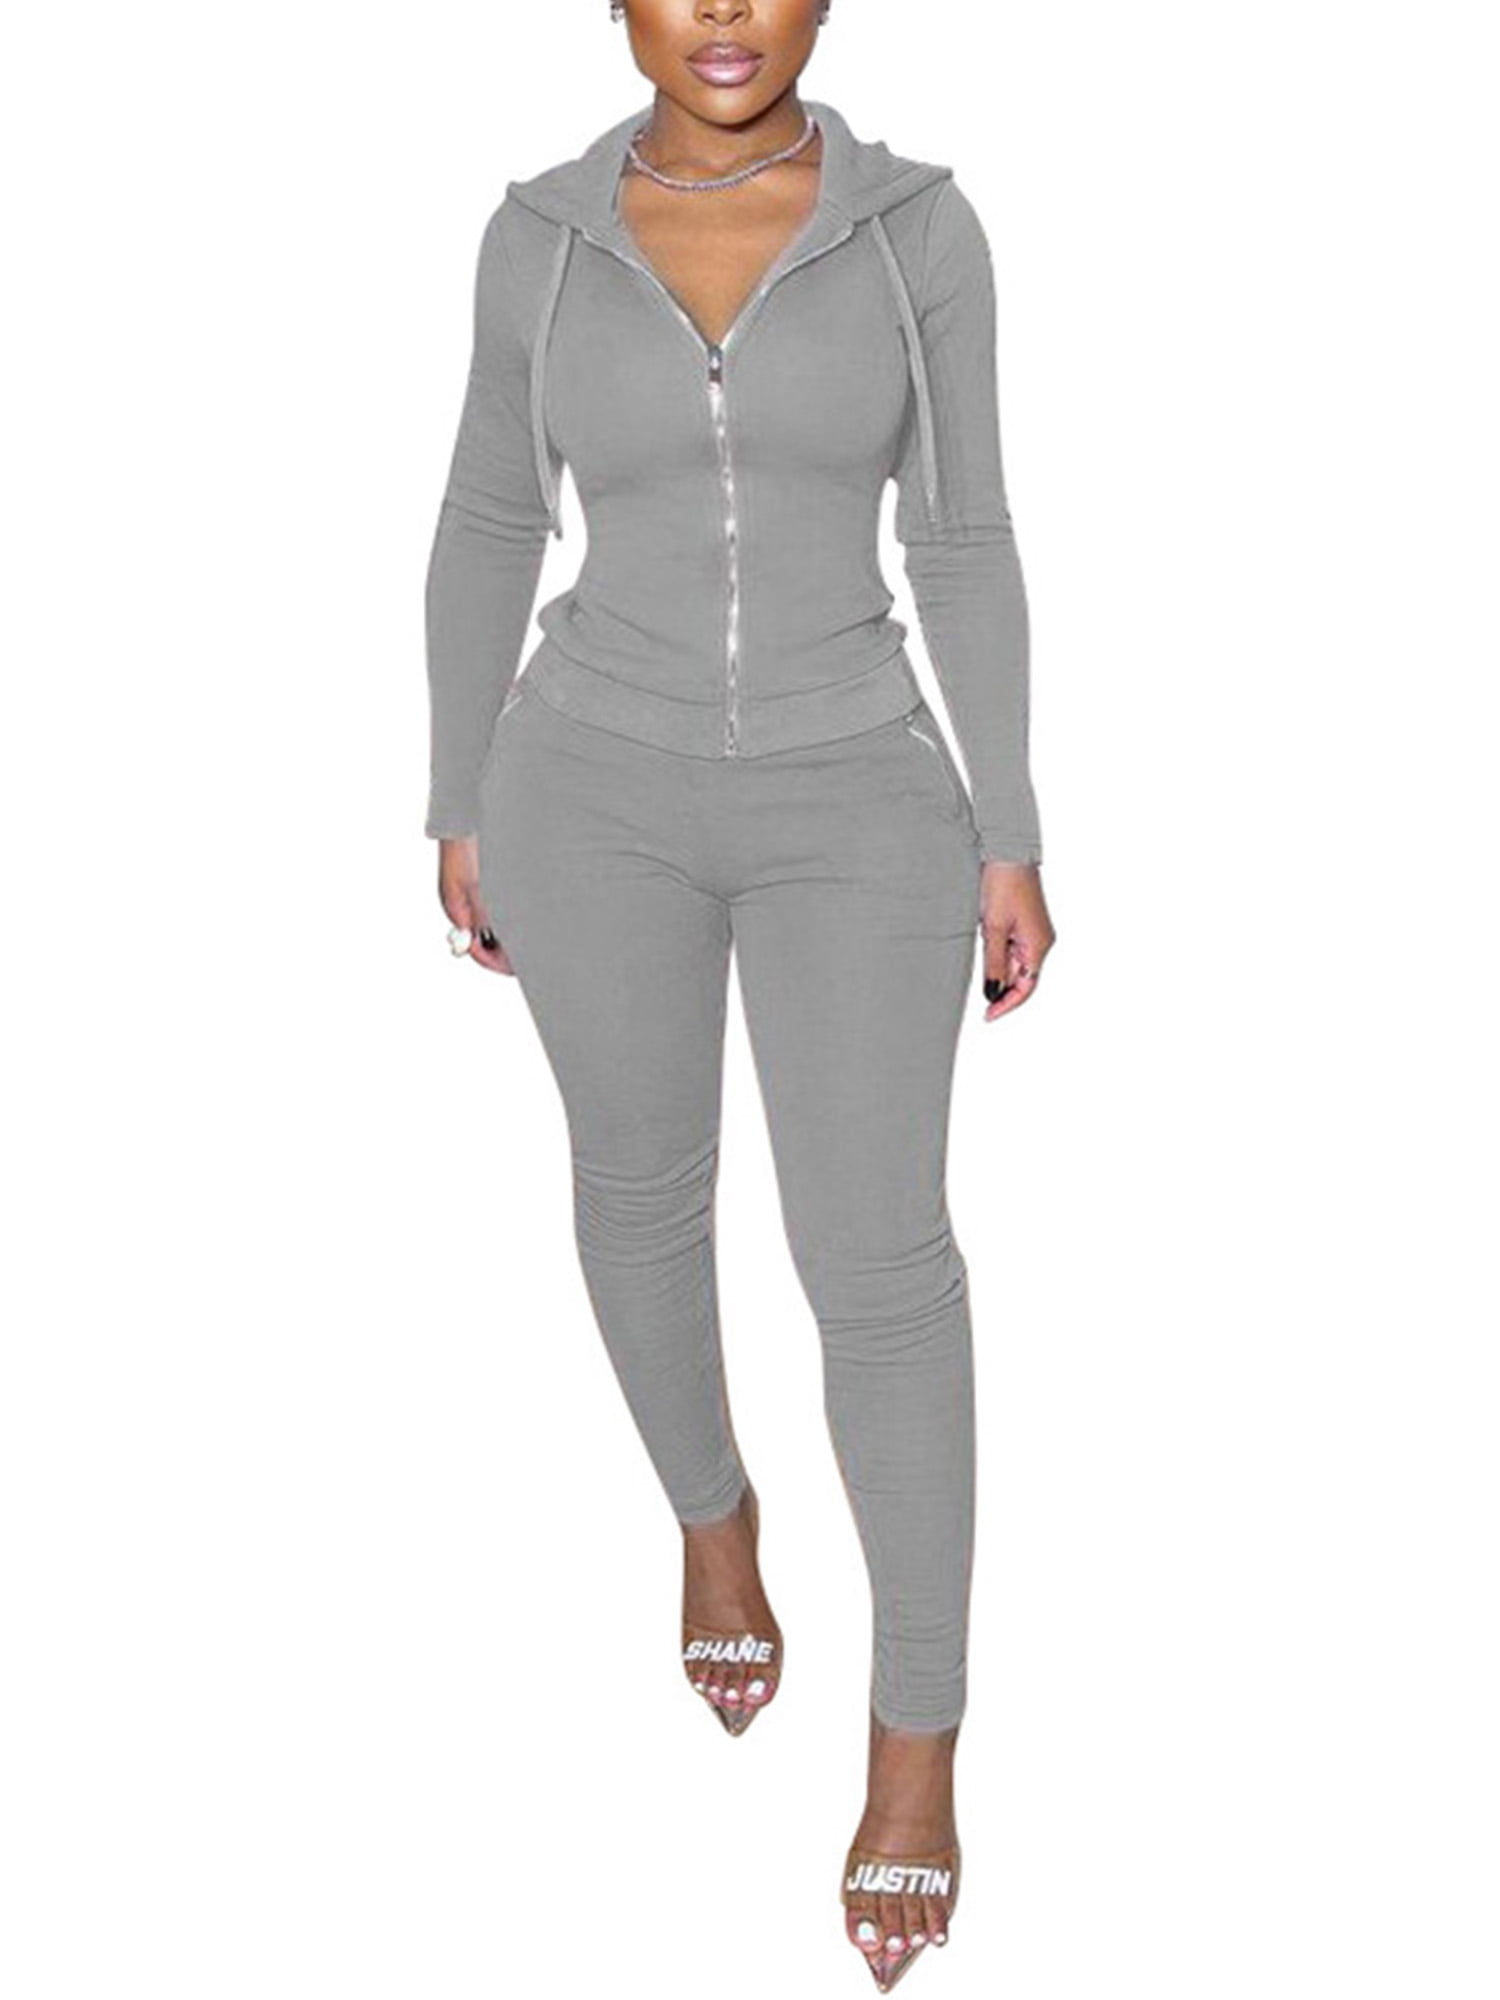 2 Piece Track Suit Set Womens High Low Top and Bottoms Casual Loungewear Ladies Batwing Sweatshirt Joggers Set